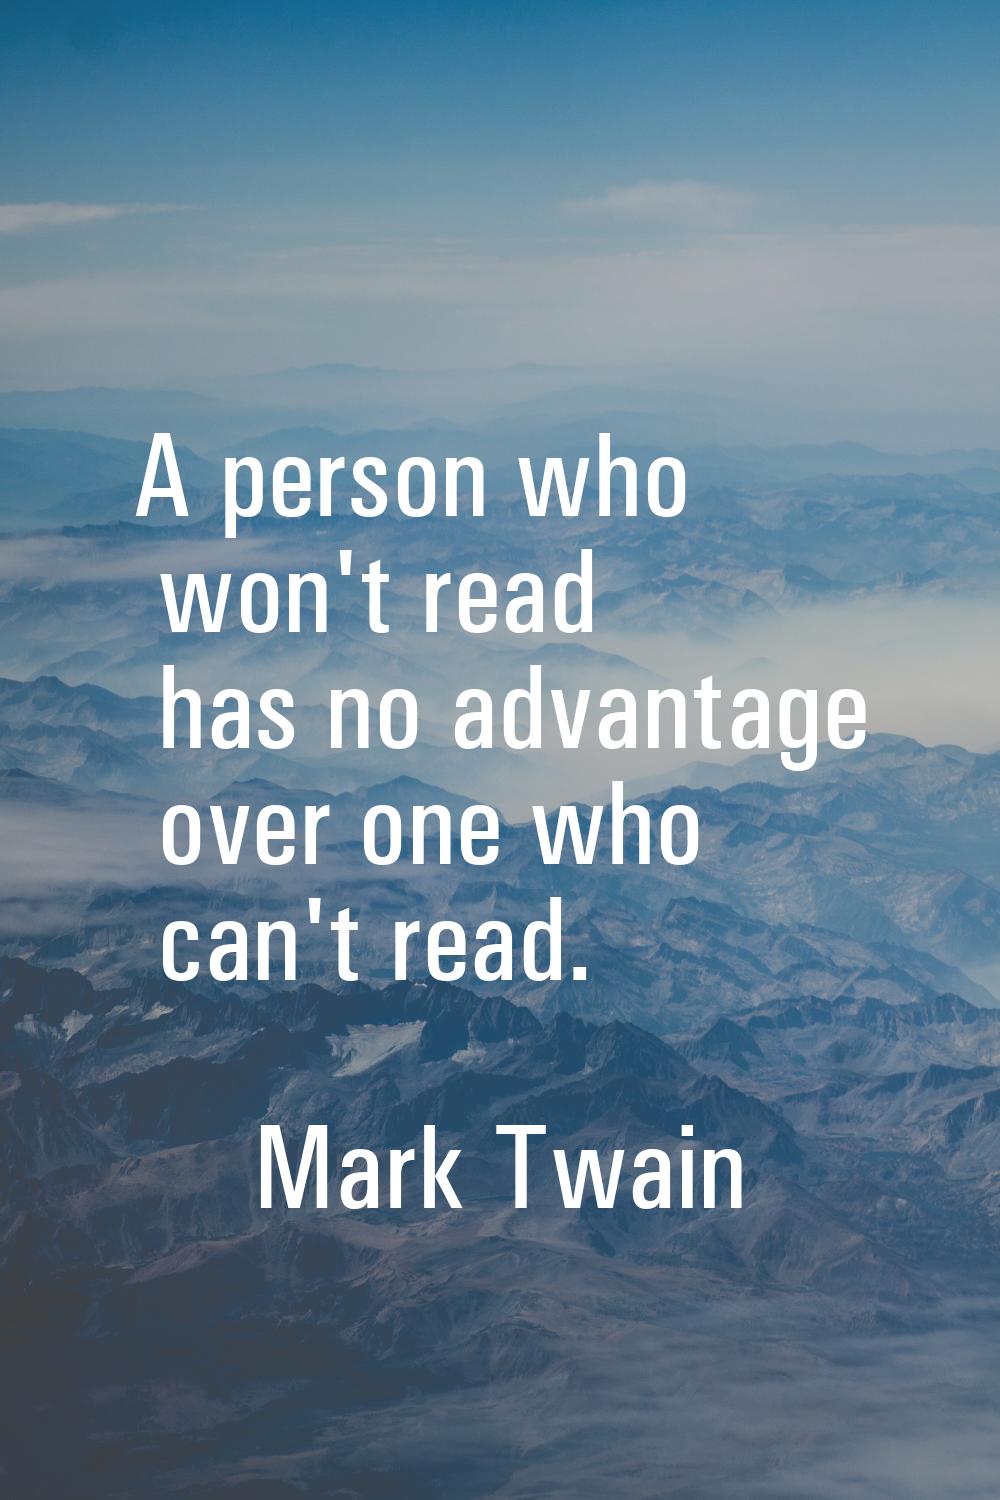 A person who won't read has no advantage over one who can't read.